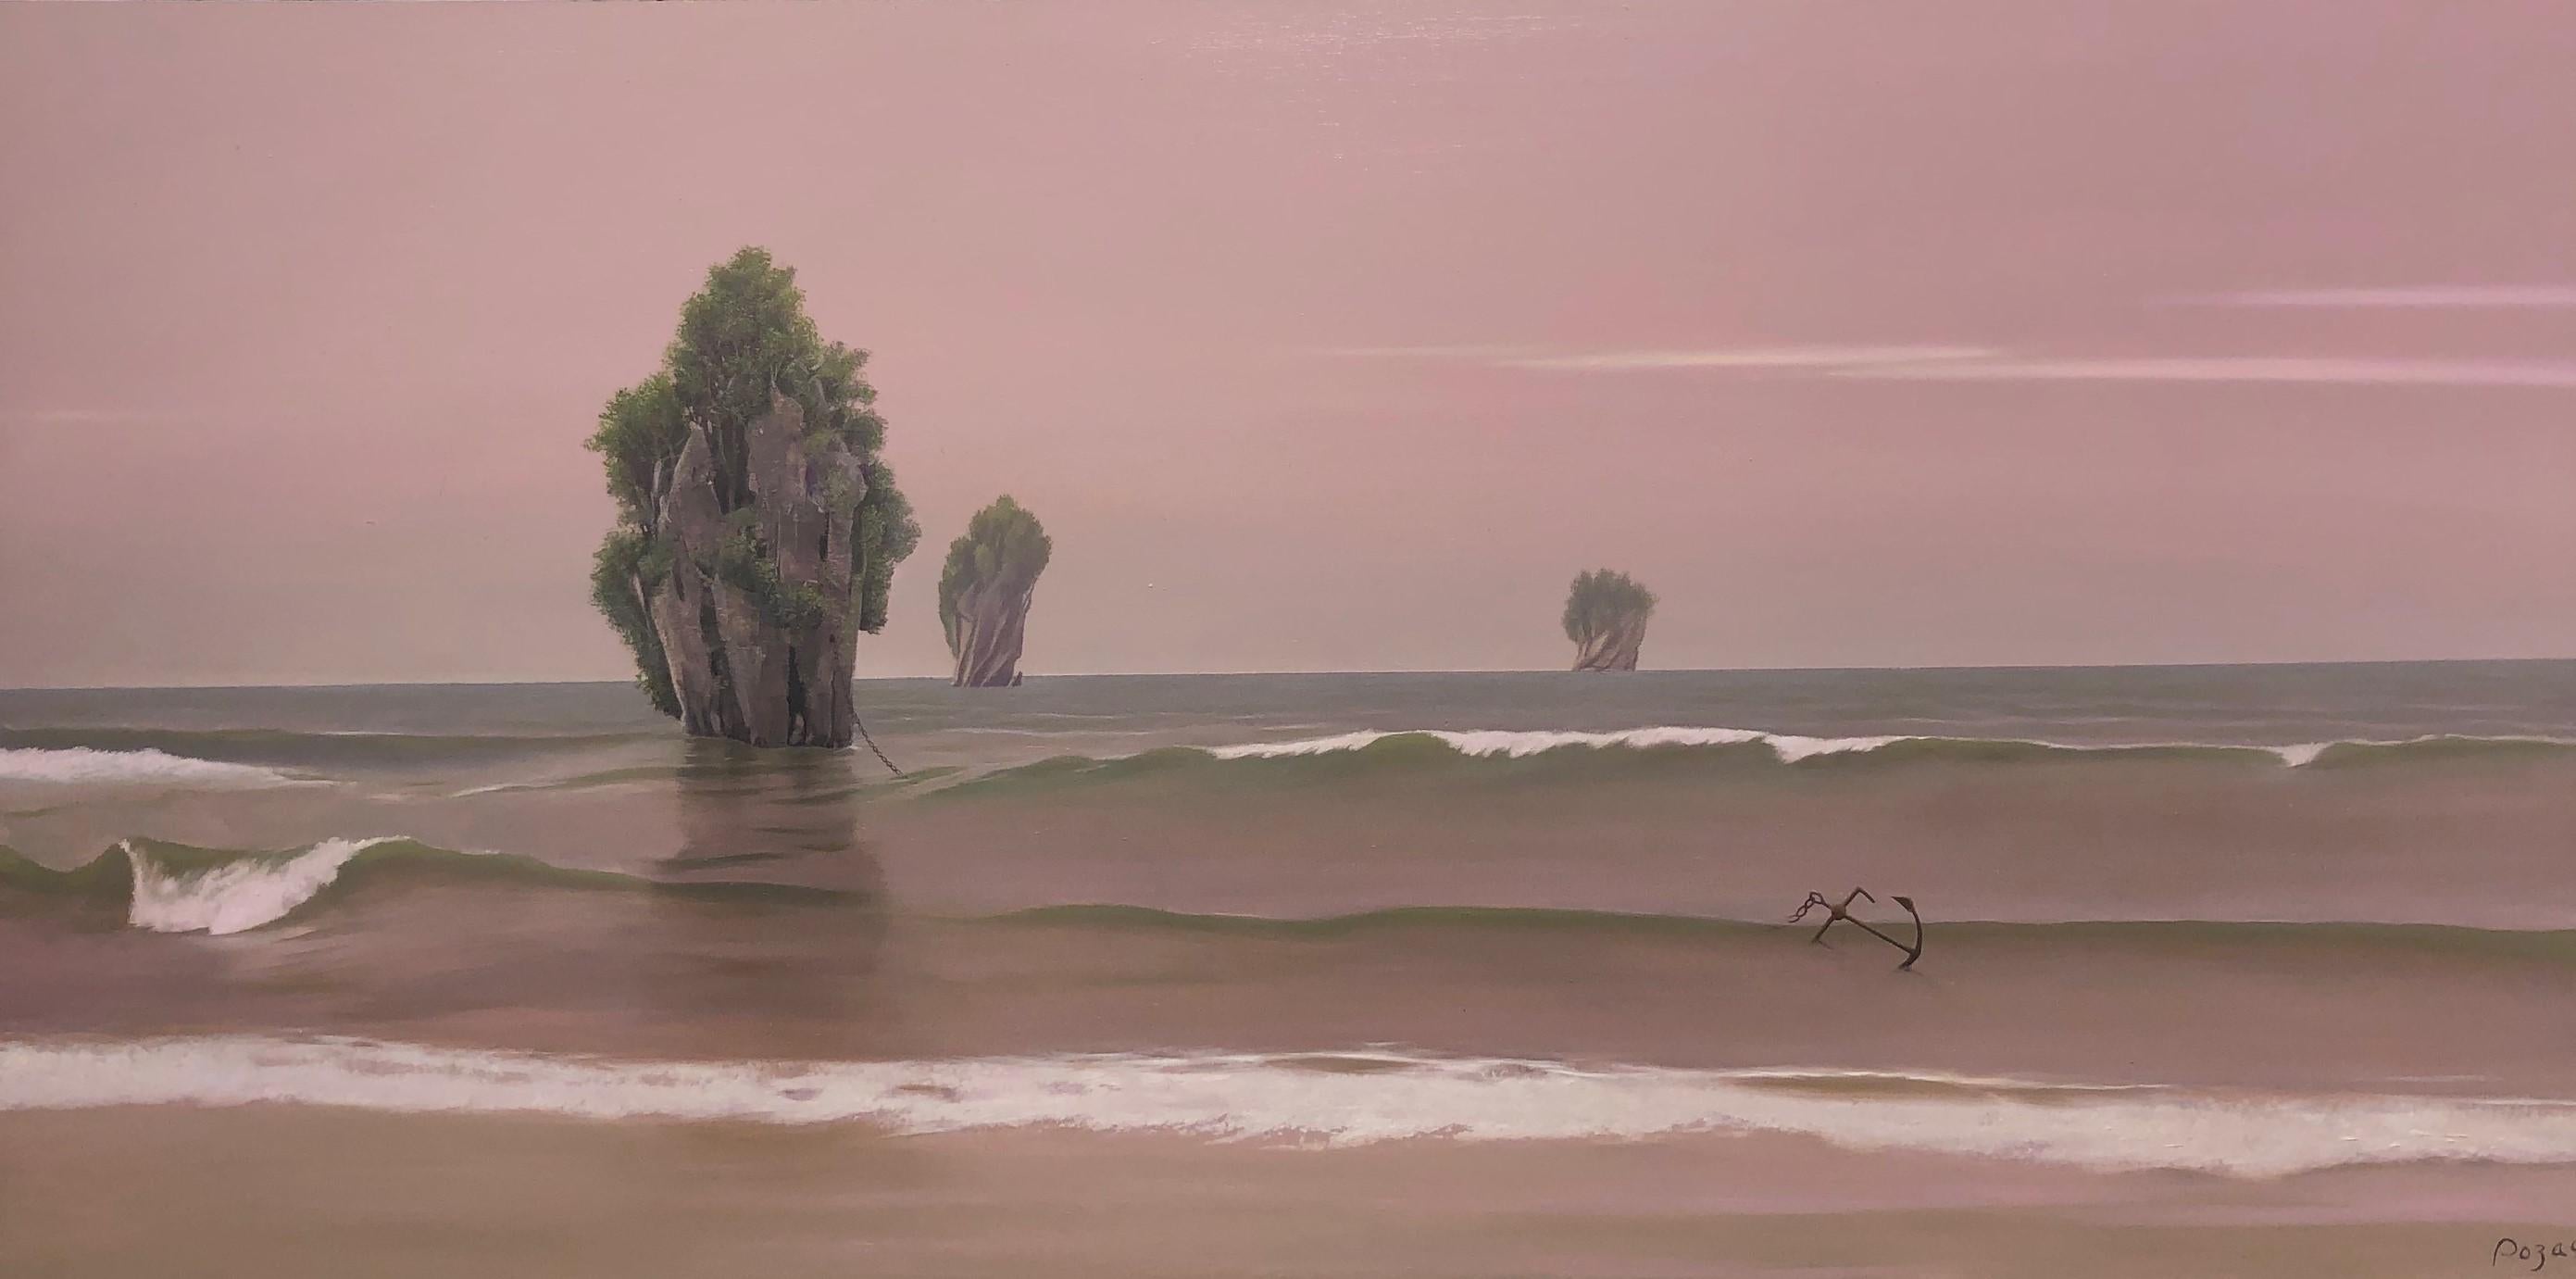 René Monzón Relova “Pozas” Landscape Painting - Beginning of a Dream, Surreal Ocean Landscape in Shades of Pink and Green